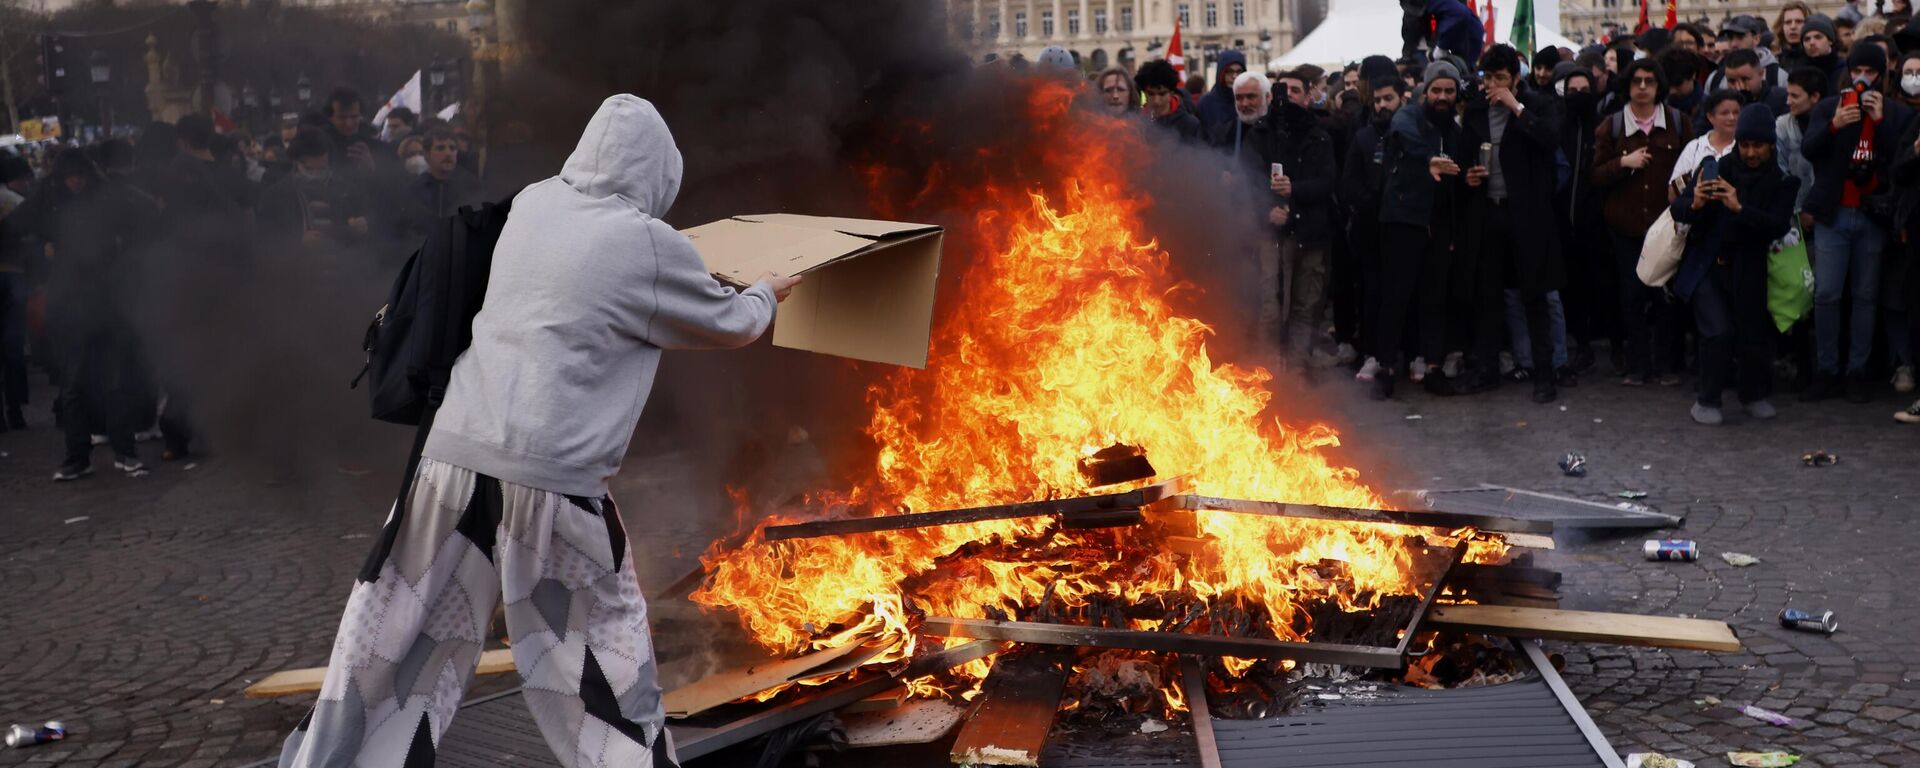 A protester throws a cardboard to feed burning pallets during a demonstration at Concorde square near the National Assembly in Paris, Thursday, March 16, 2023.  - Sputnik International, 1920, 06.06.2023